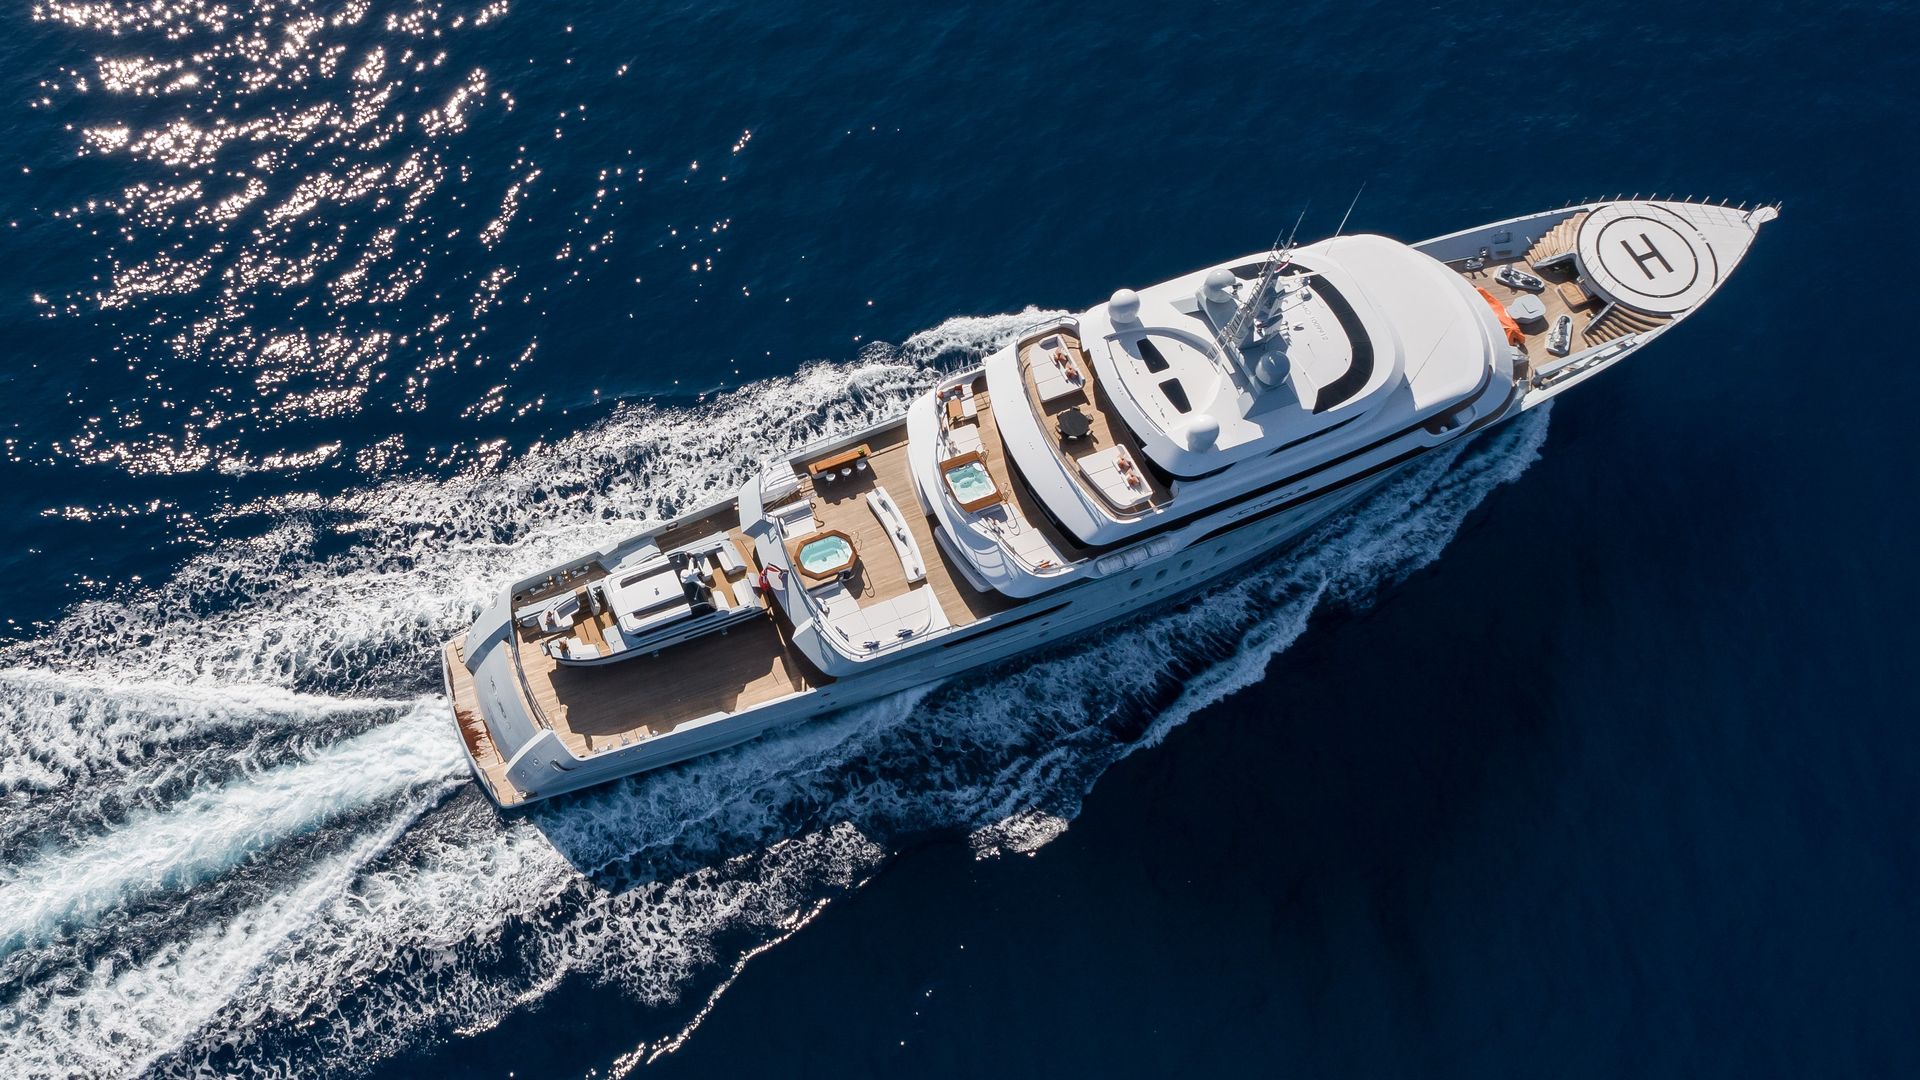 An aerial photo of the superyacht Victorious